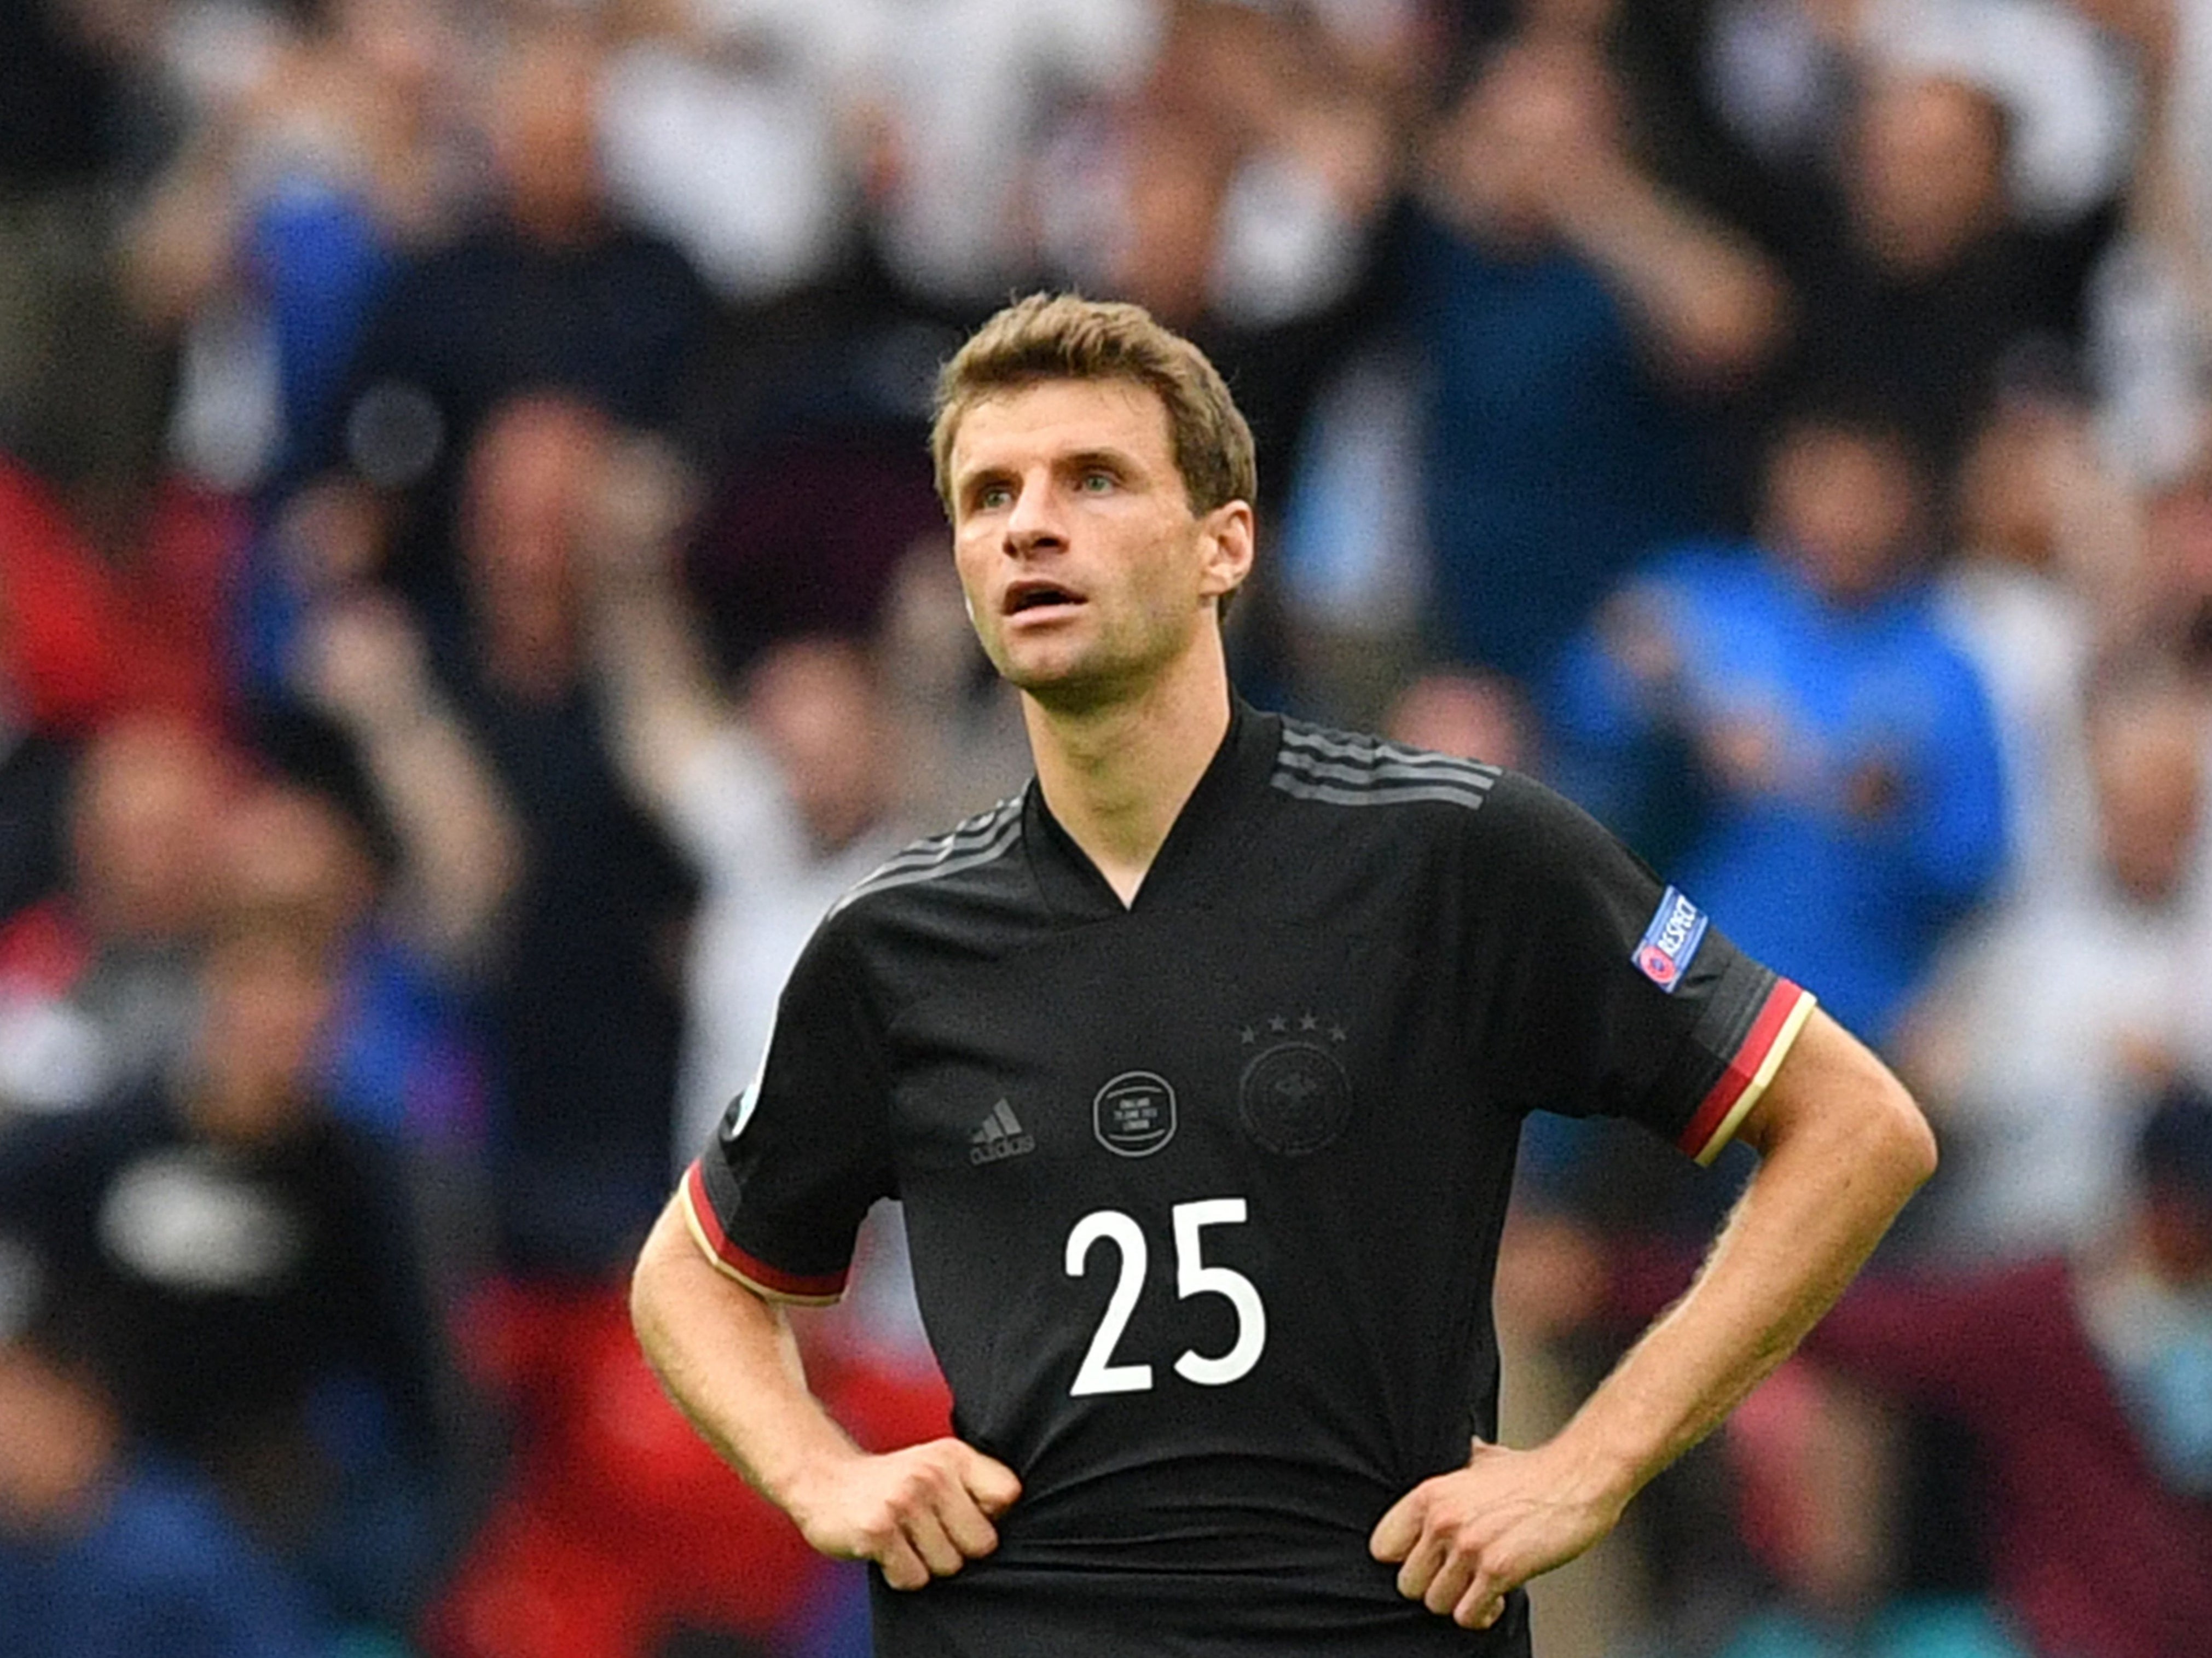 Thomas Muller has played for Bayern Munich since 2008.